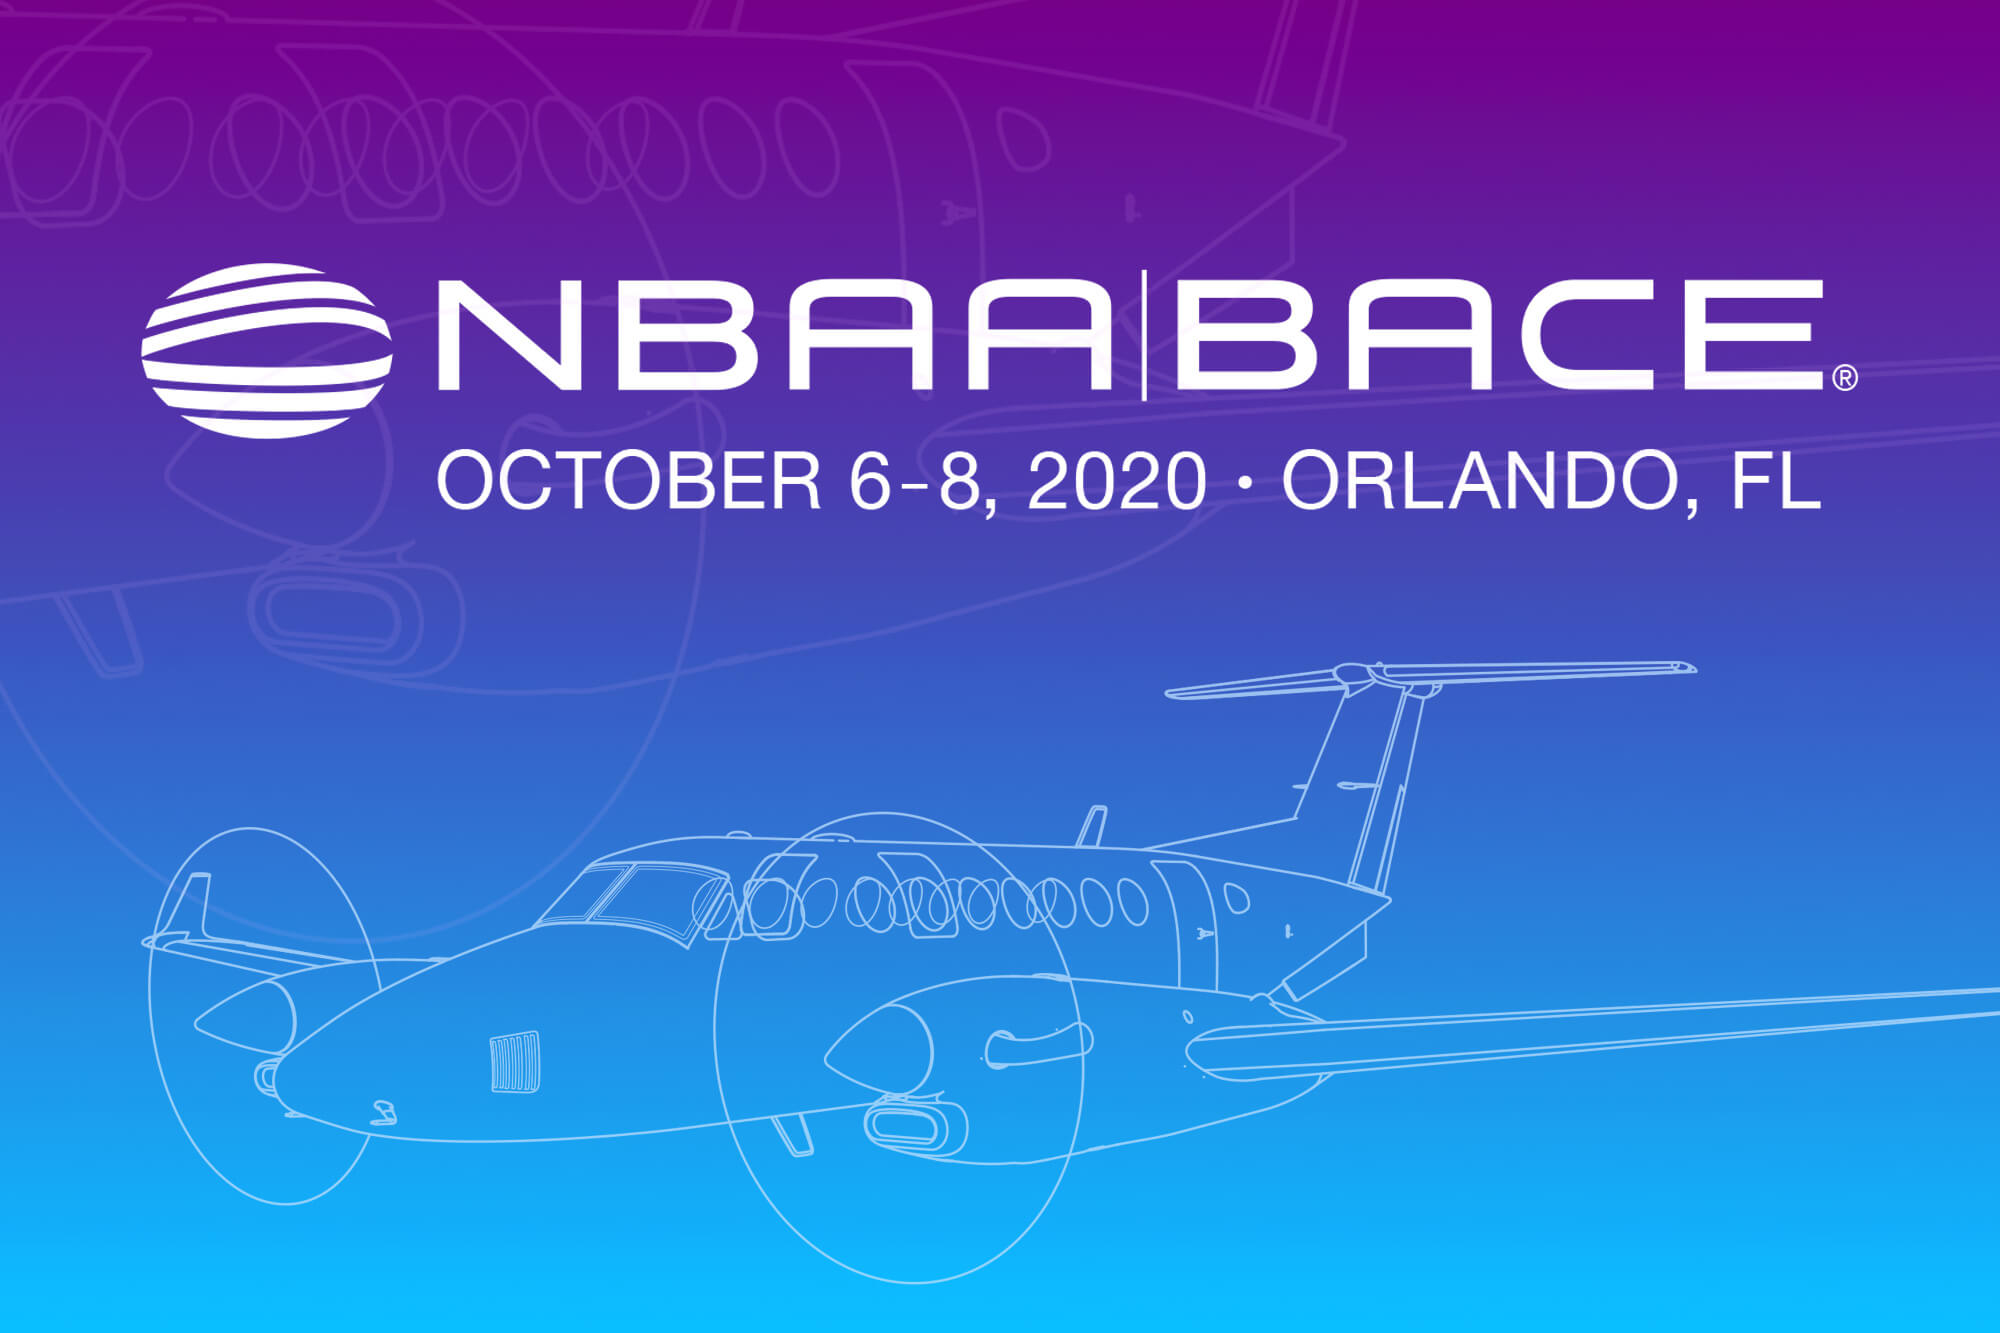 NBAA-BACE 2020 Cancelled Due to COVID-19 Pandemic